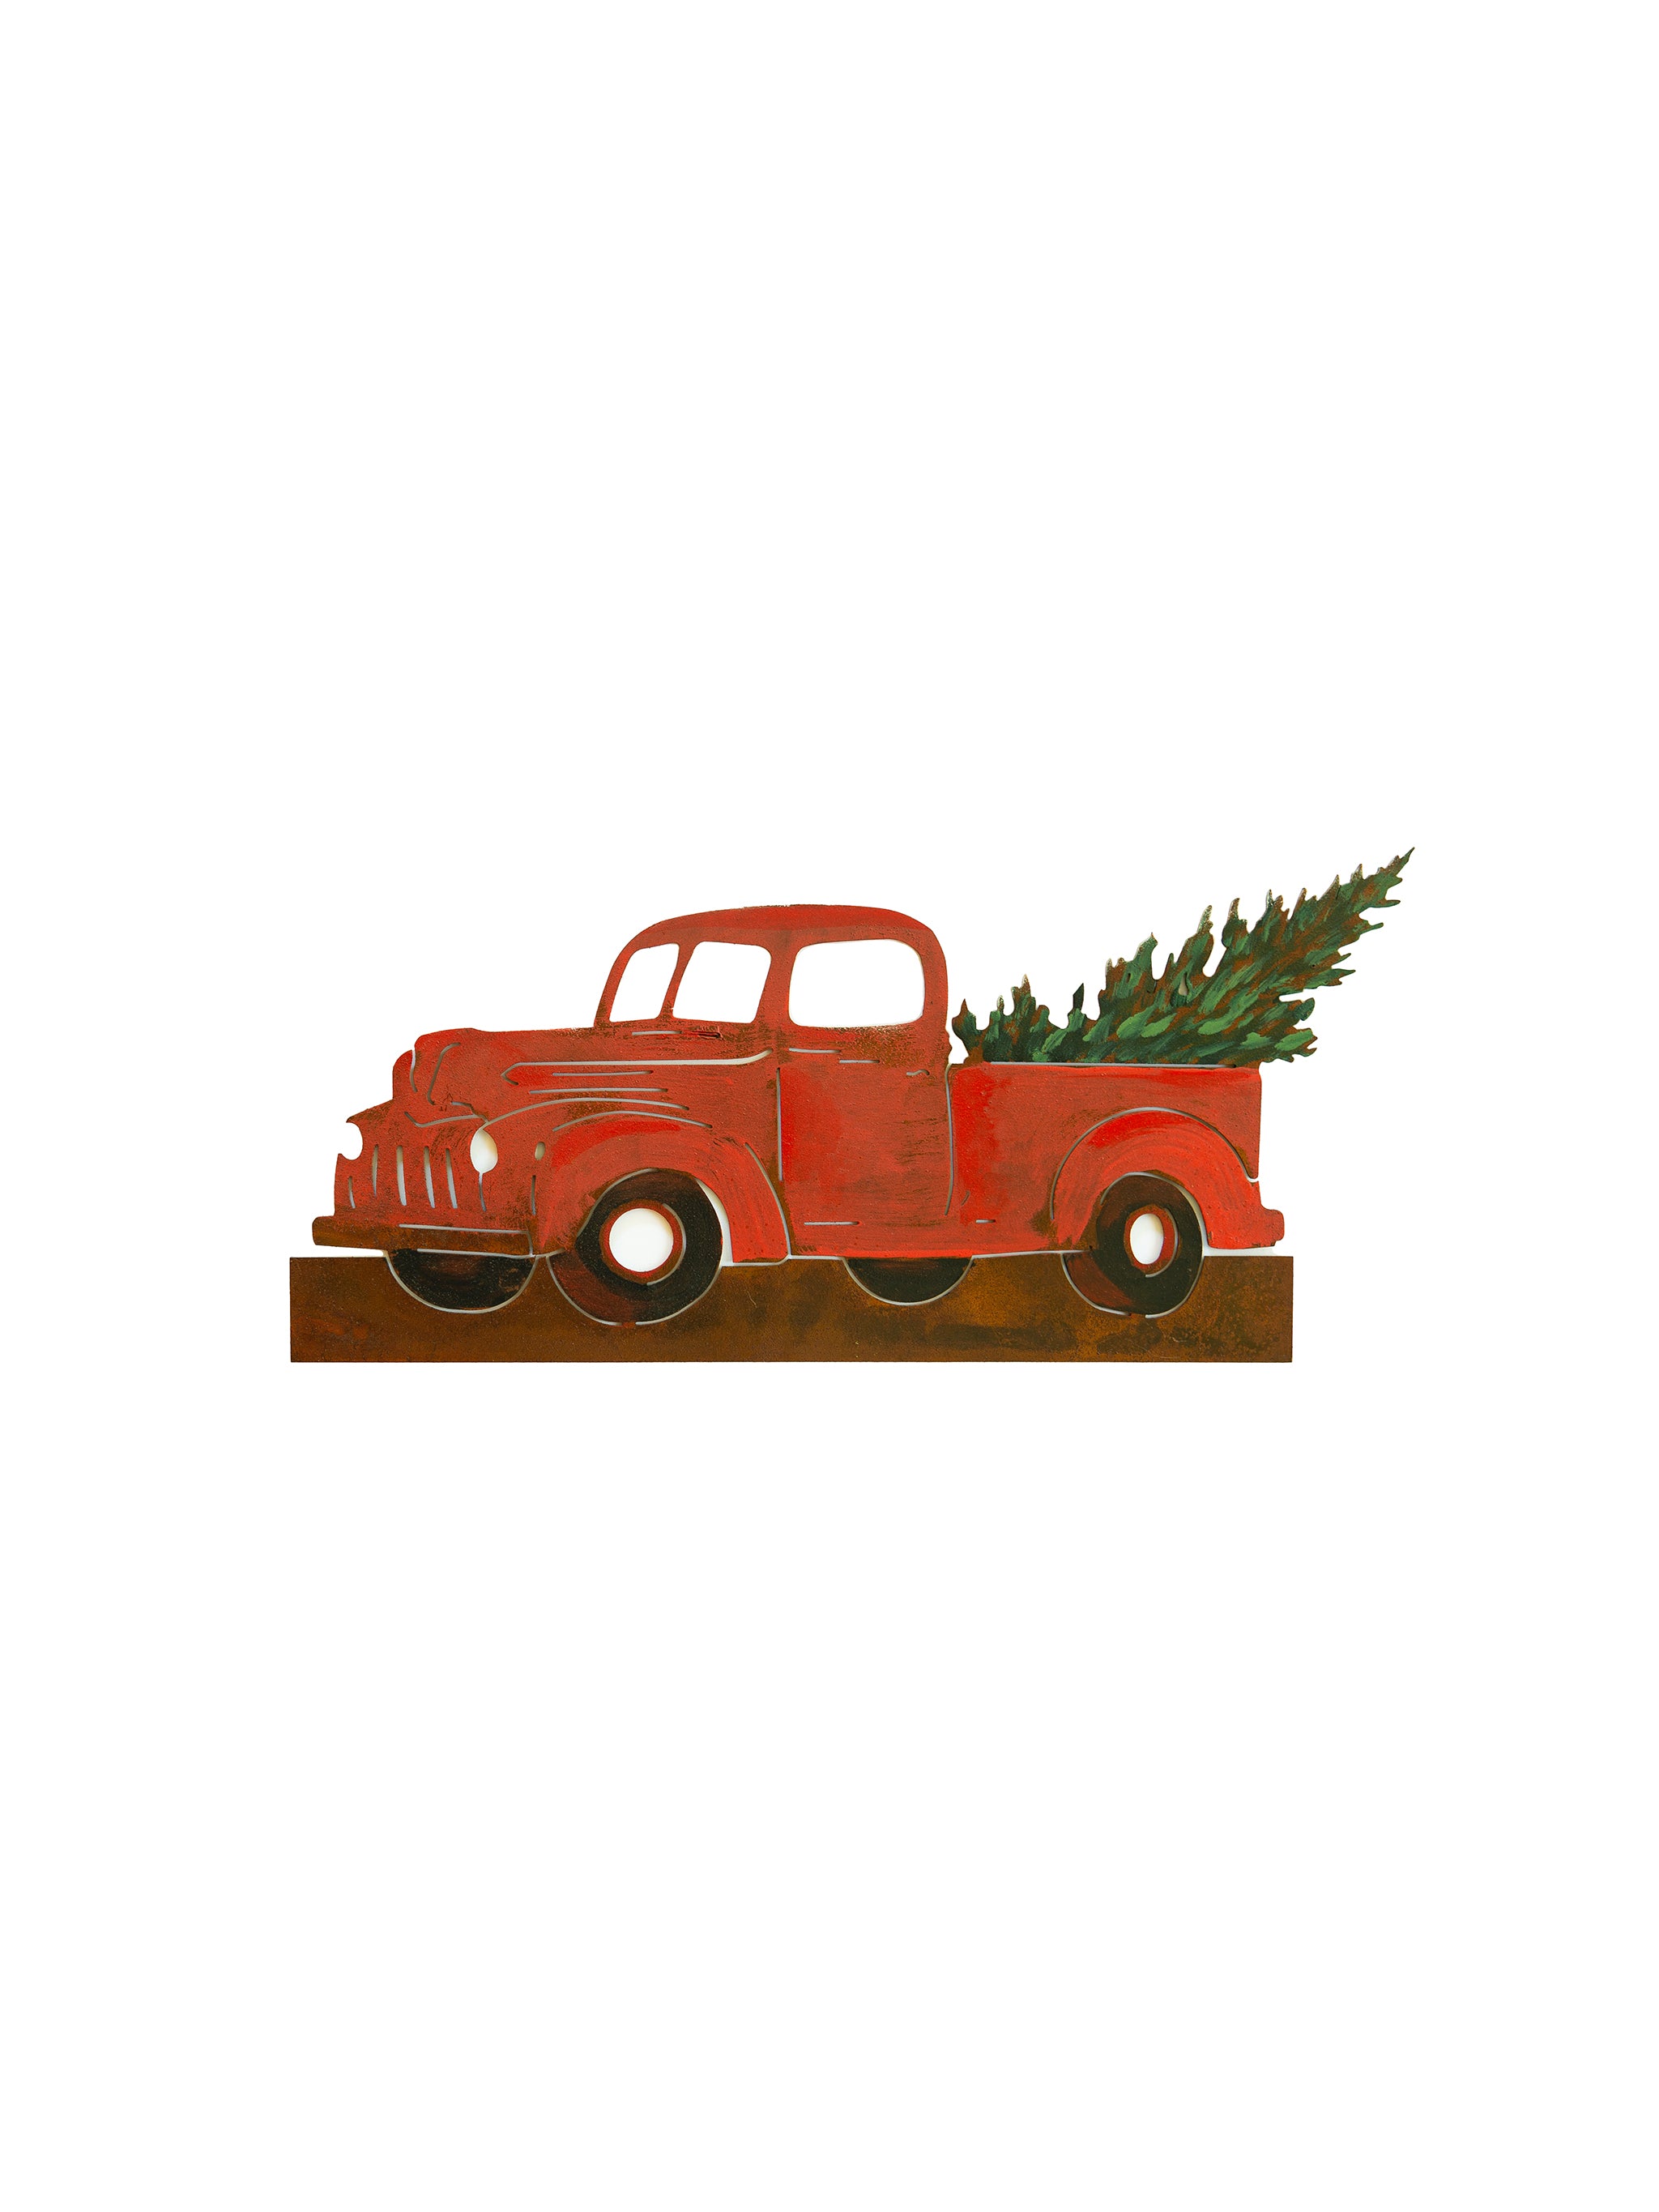 Shop the Vintage Metalworks Red Truck with Tree at Weston Table